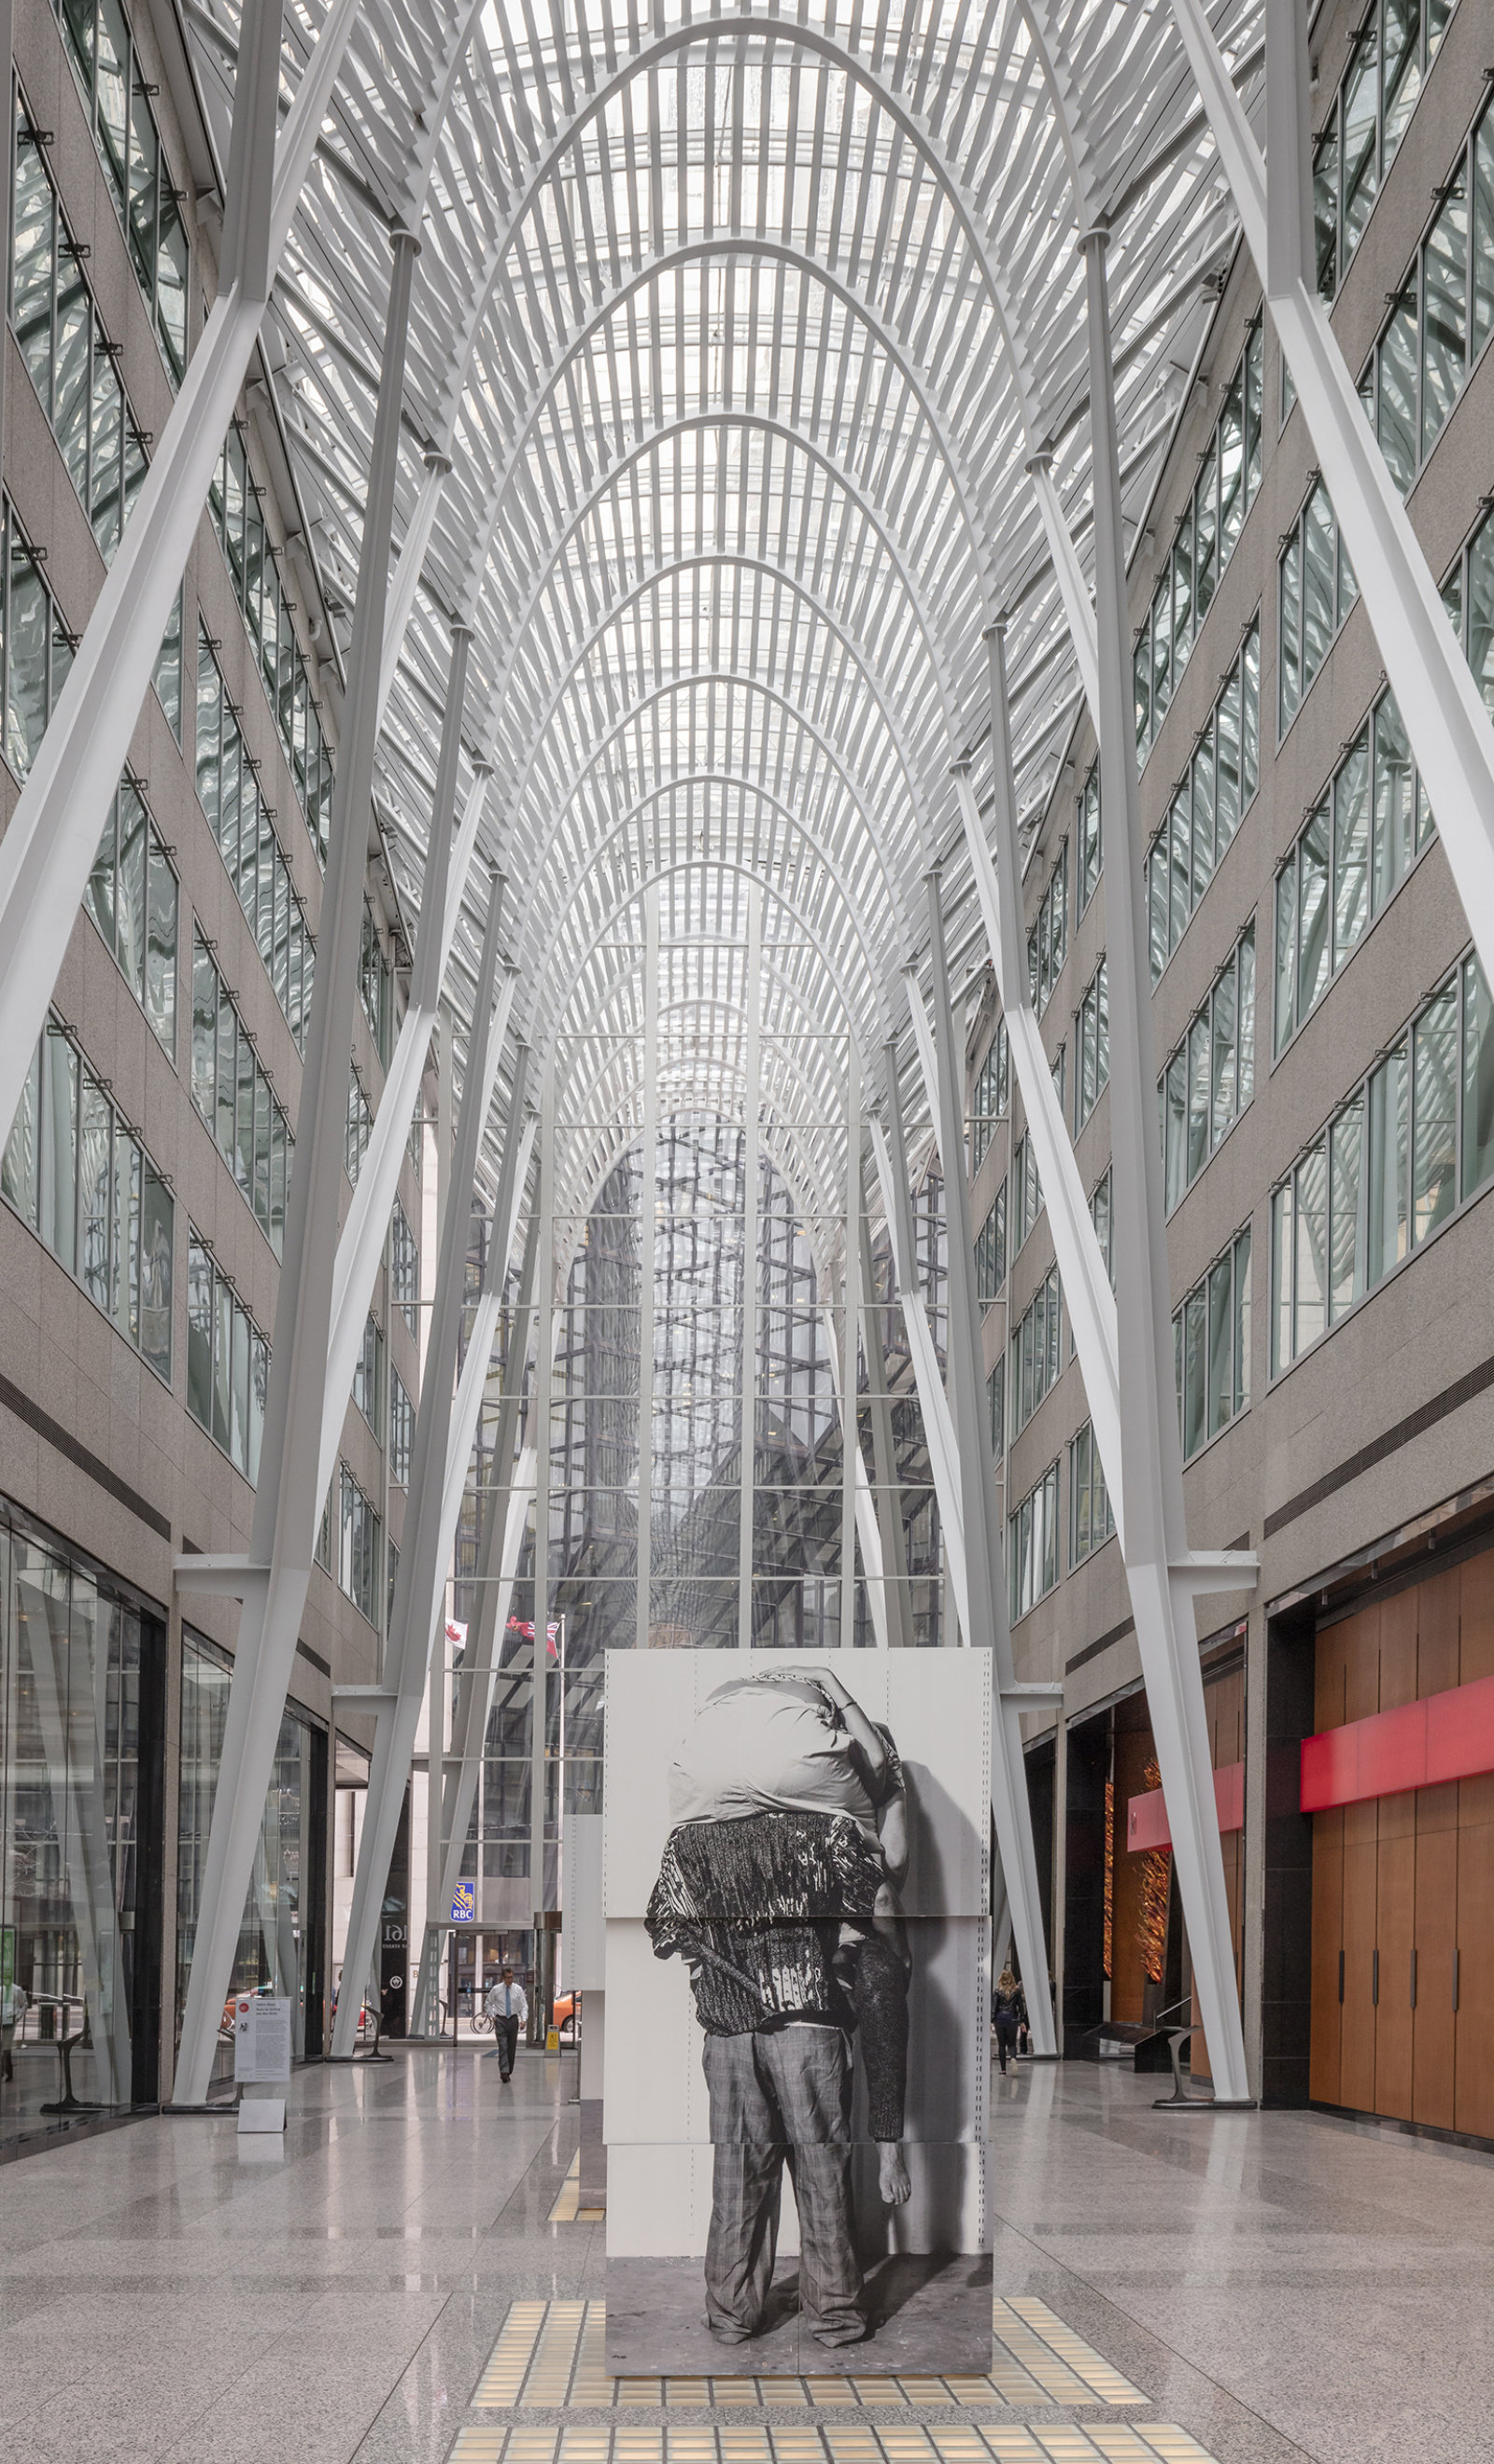 Valérie Blass, One Piece Mohair from Nous ne somme pas des héros, 2017, mixed media, dimensions variable. Installation view, Brookfield Place, Toronto, ON, 2017